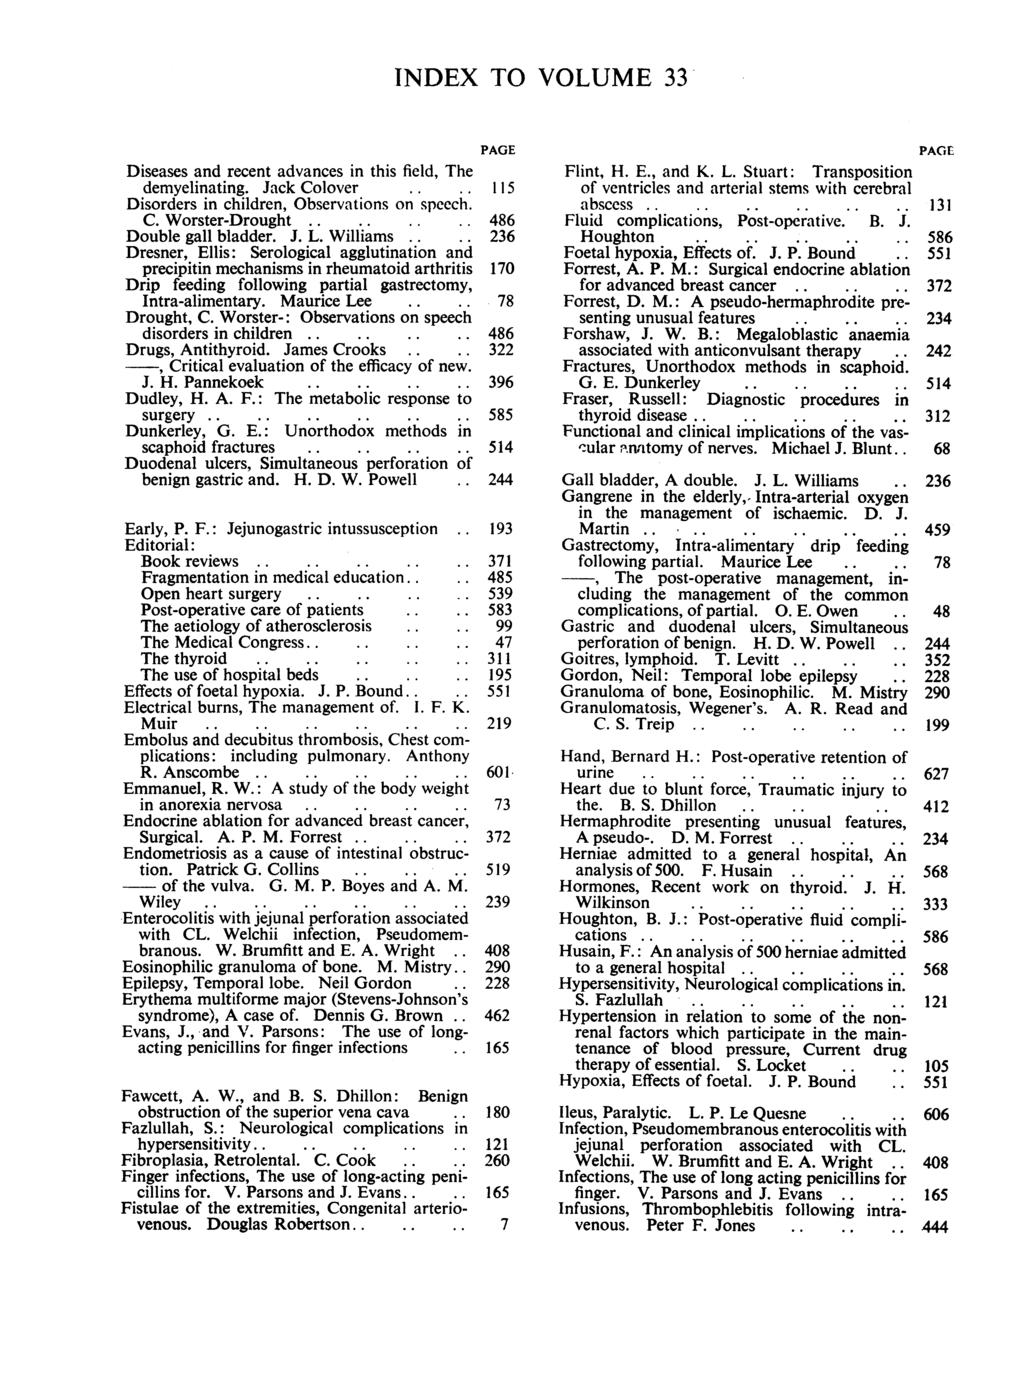 INDEX TO VOLUME 33 Diseases and recent advances in this field, The demyelinating. Jack Colover Disorders in children, Observations on speech. C. Worster-Drought.. Double gall bladder. J. L.